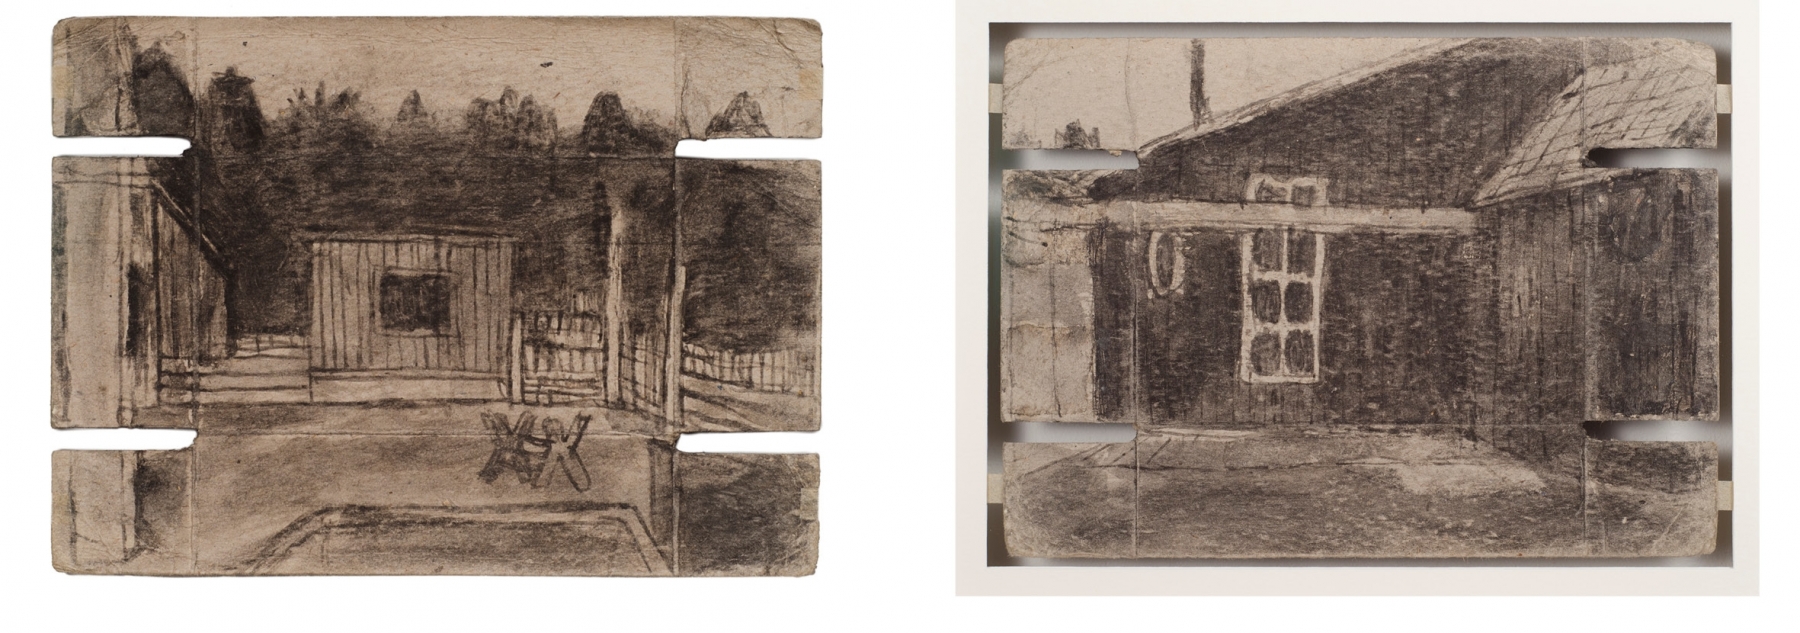 James Castle,&nbsp;Untitled (Shed with sawhorse/shed), n.d.;&nbsp;soot and saliva on found paper,&nbsp;5 1/2h x 7 3/8w in/&nbsp;13.97h x 18.73w cm